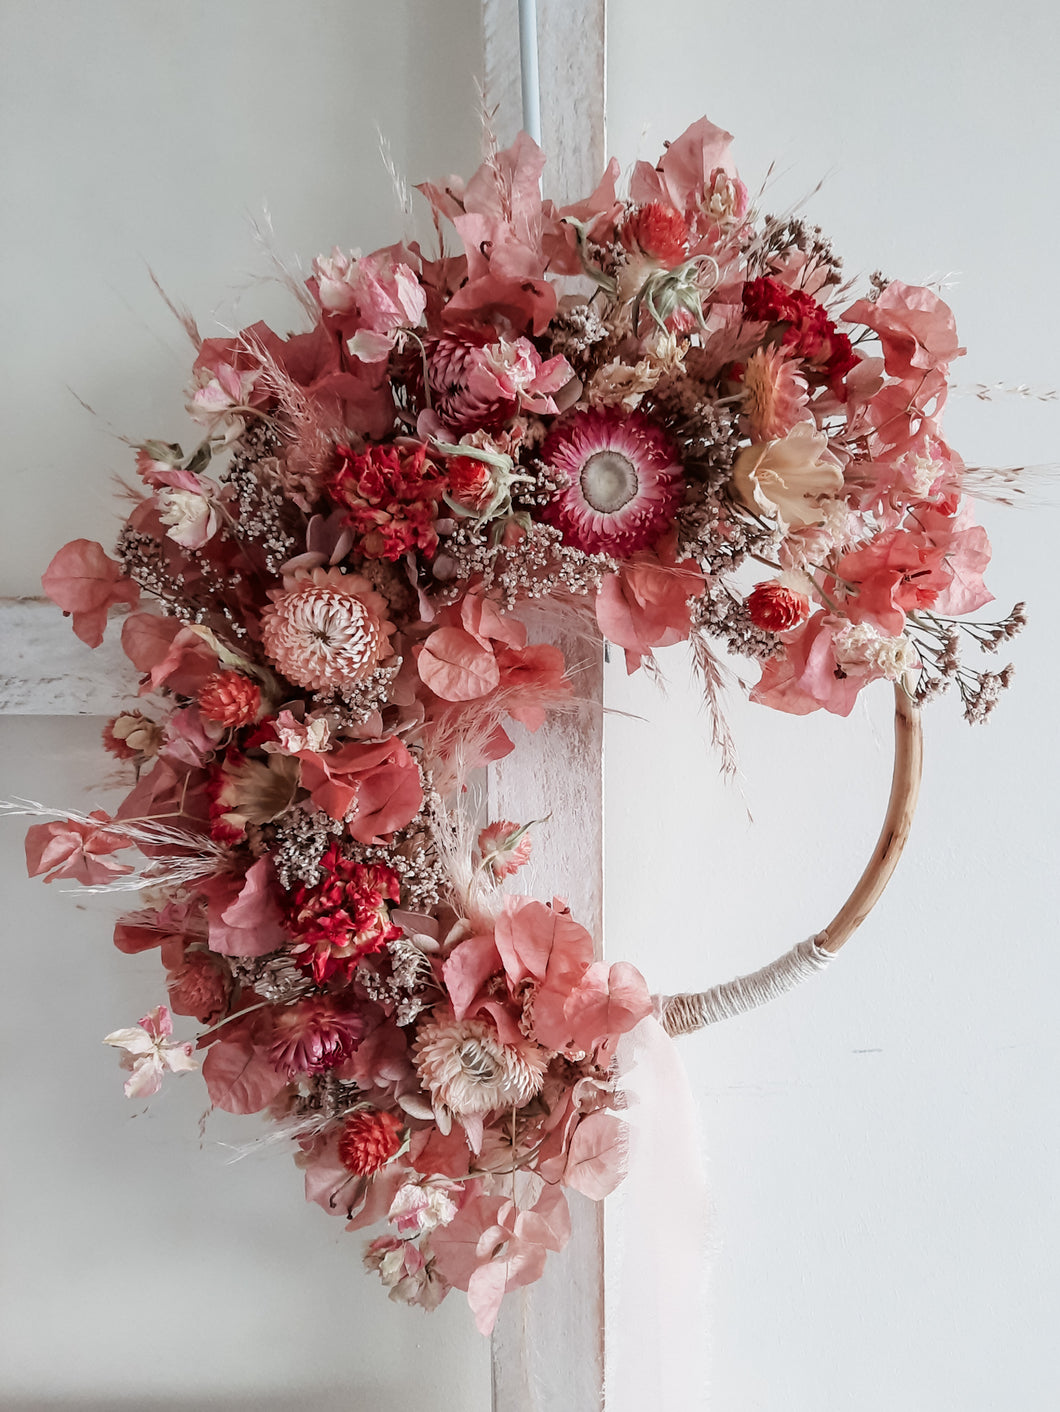 Dried flower wreath in berry tones on a rattan hoop base – close full view.